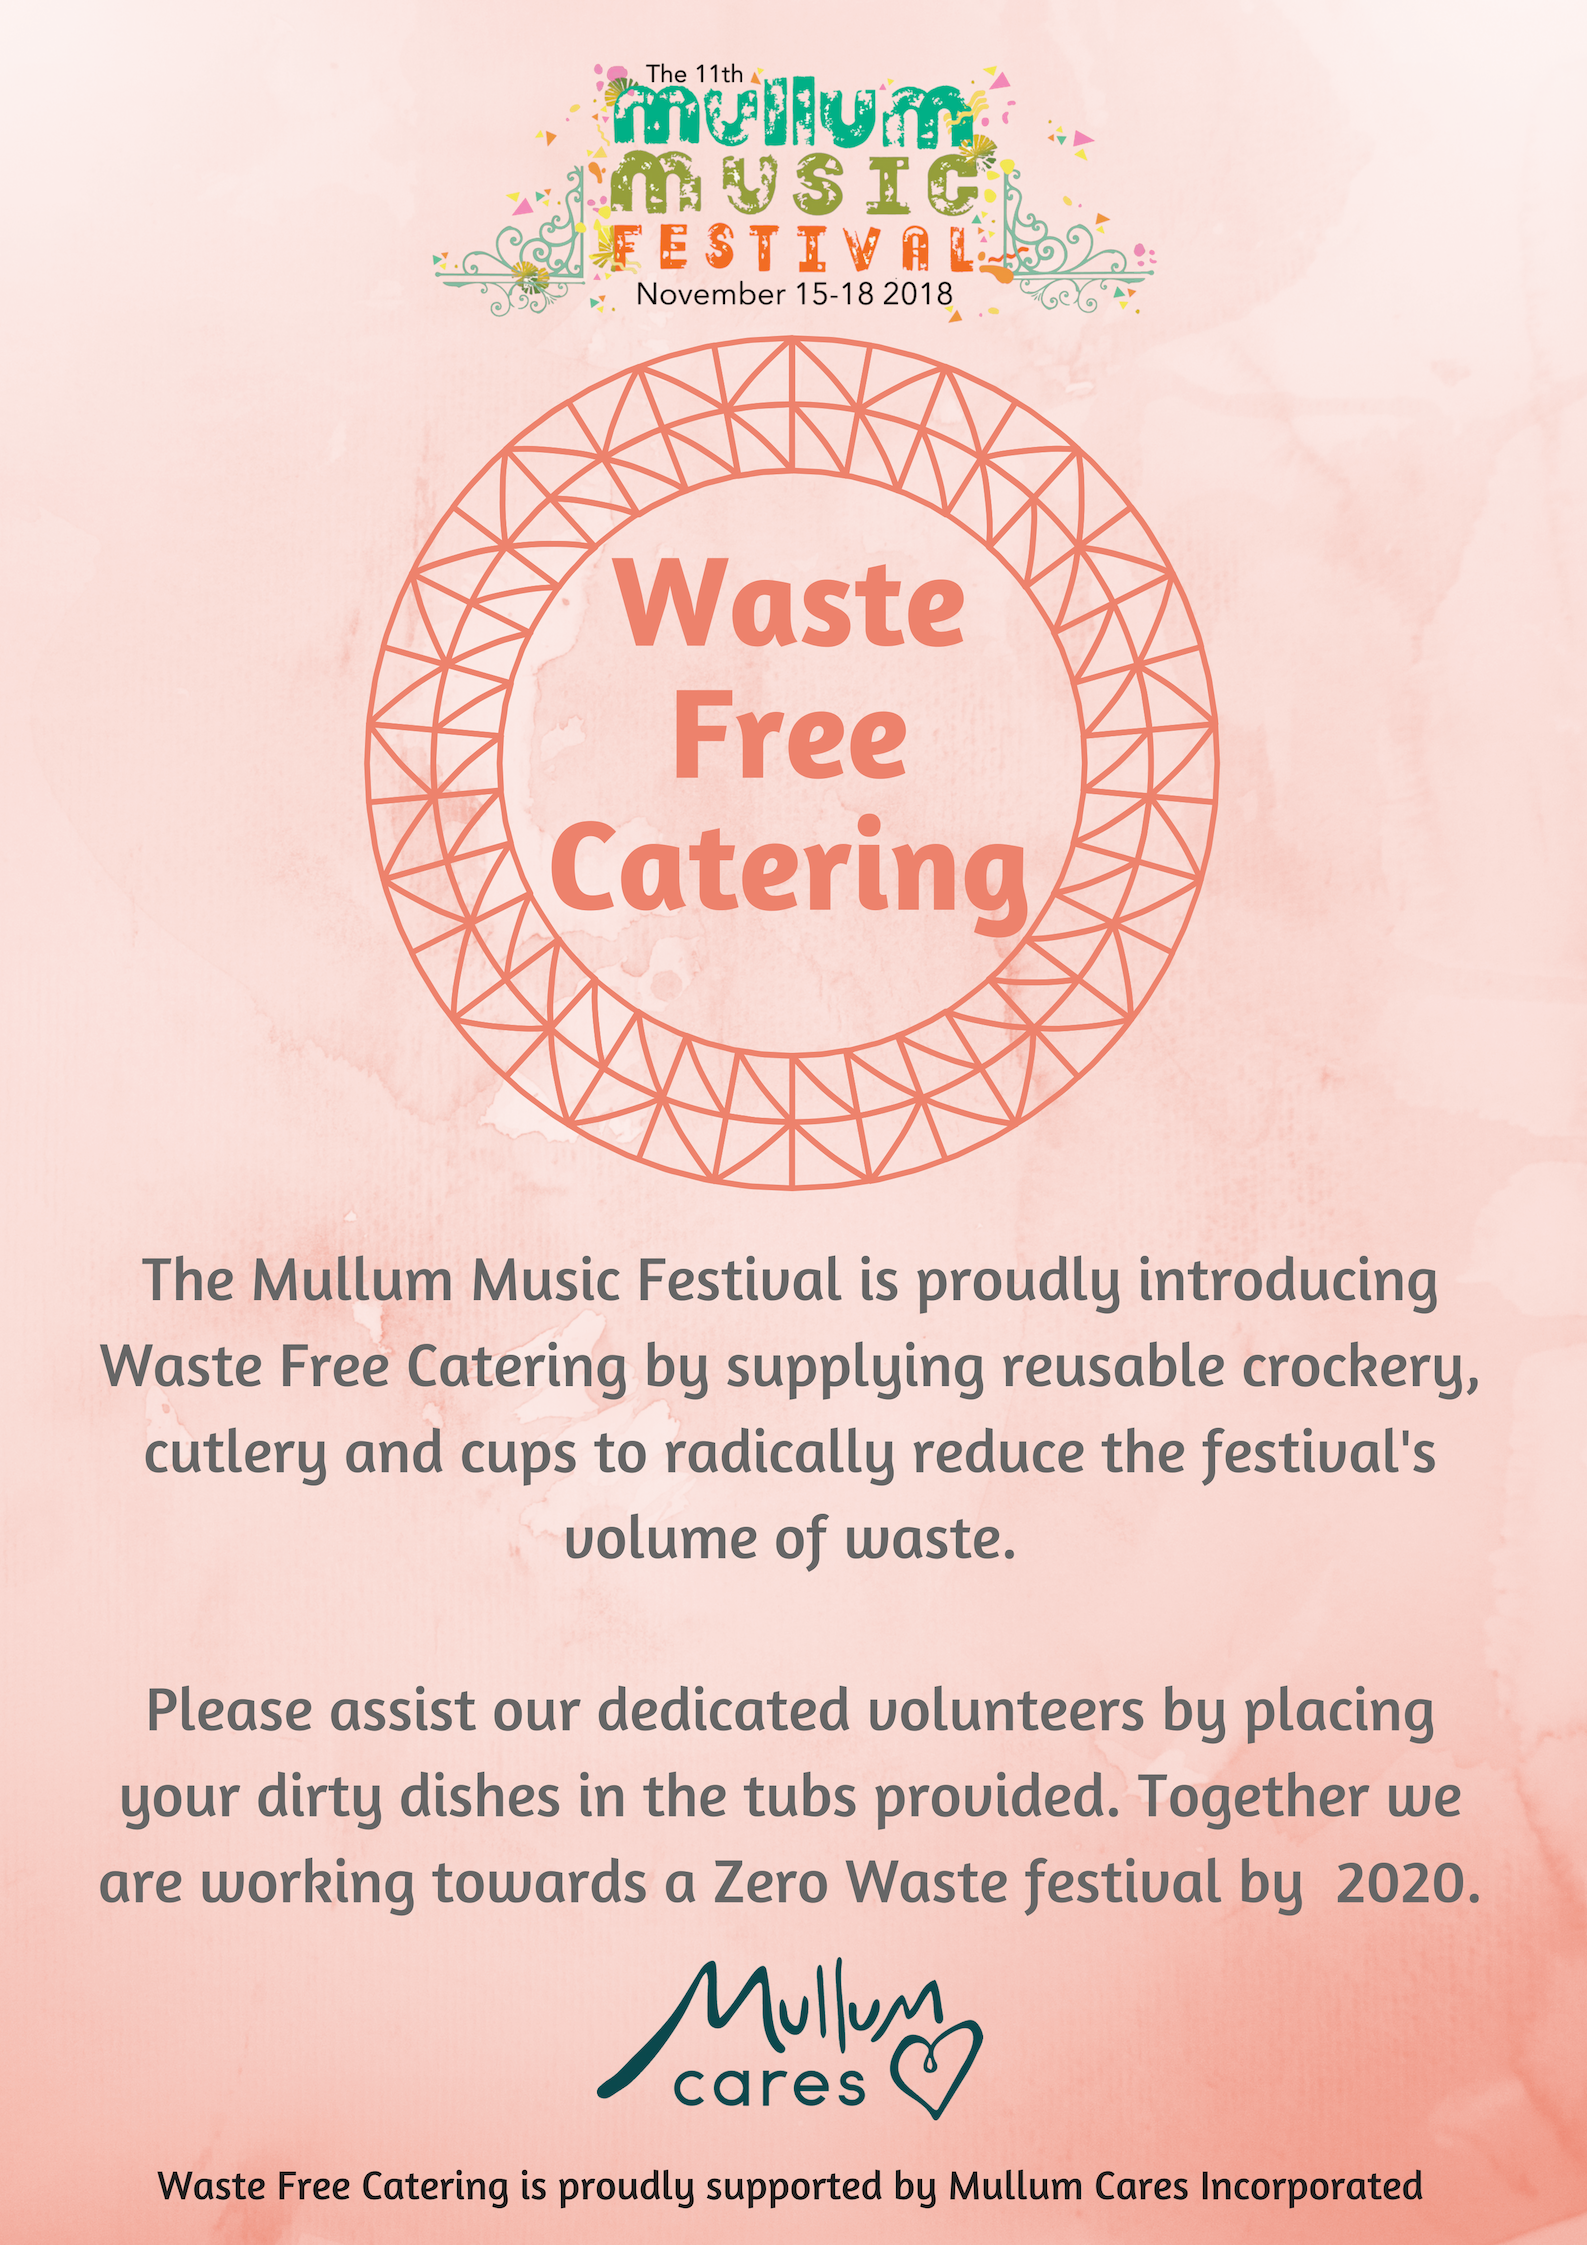 Mullum Music Festival 2018 provides Waste Free Catering at the Civic Hall & the Neighbourhood Centre precinct